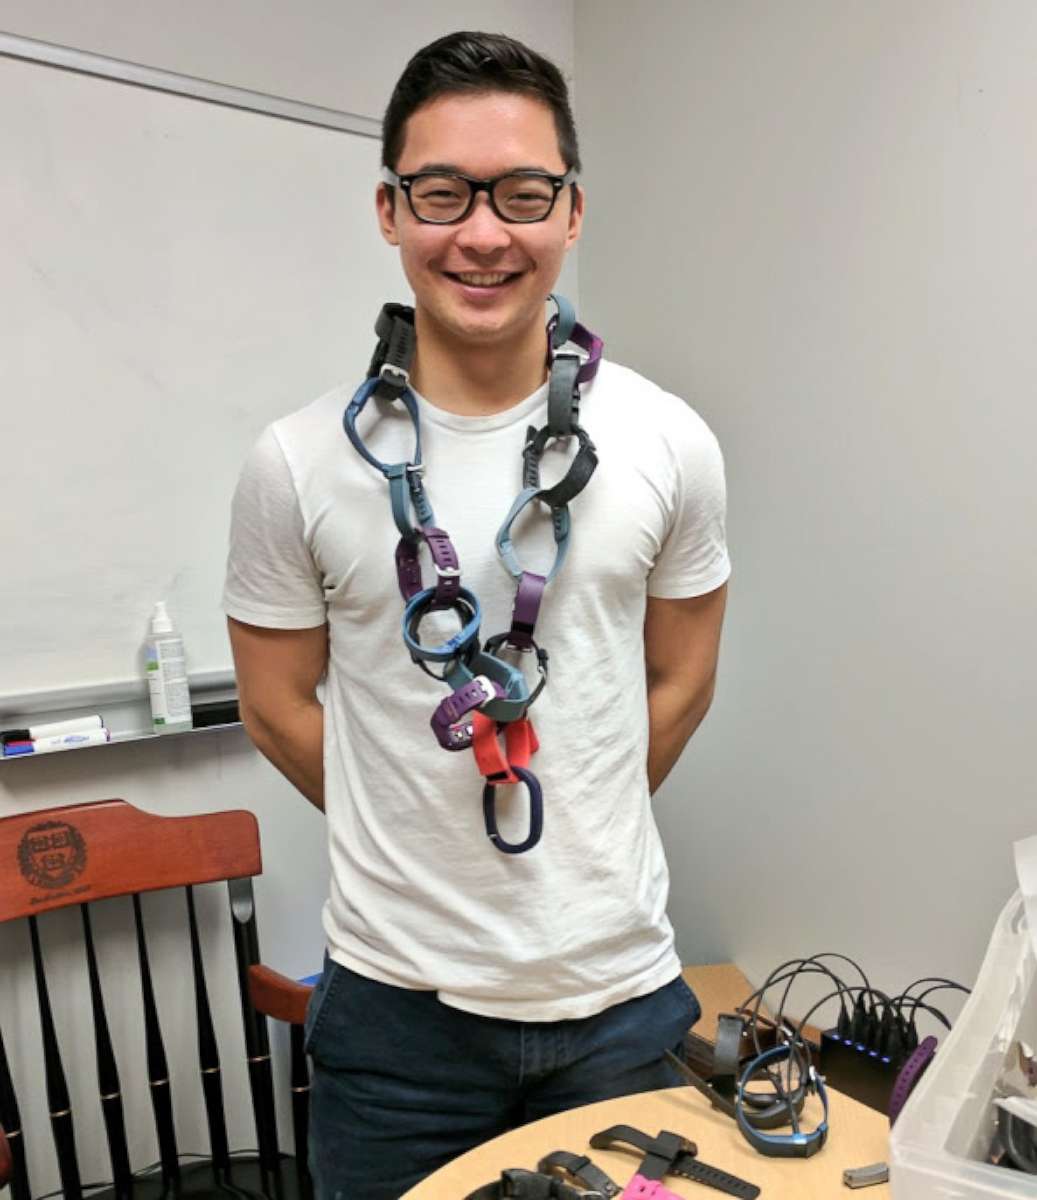 PHOTO: RecycleHealth intern wearing makeshift necklace out of donated fitness trackers in an undated photo.